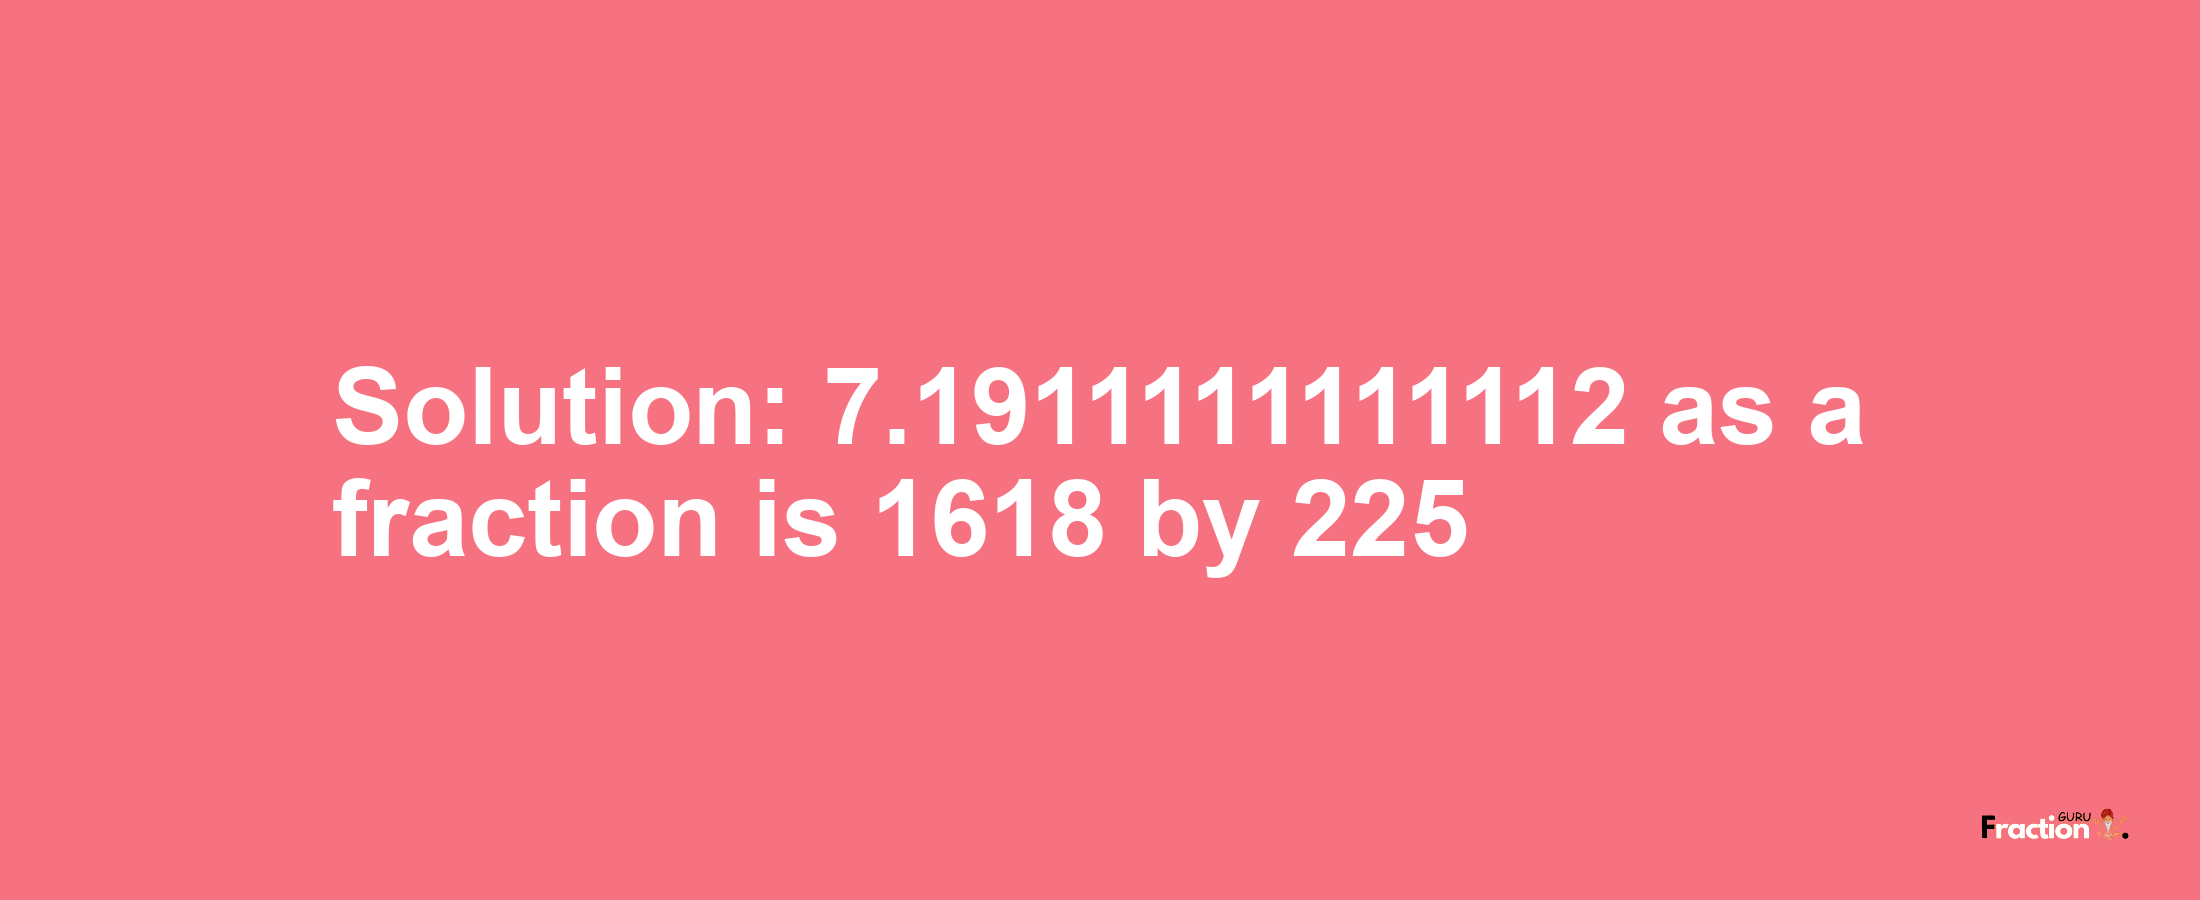 Solution:7.1911111111112 as a fraction is 1618/225